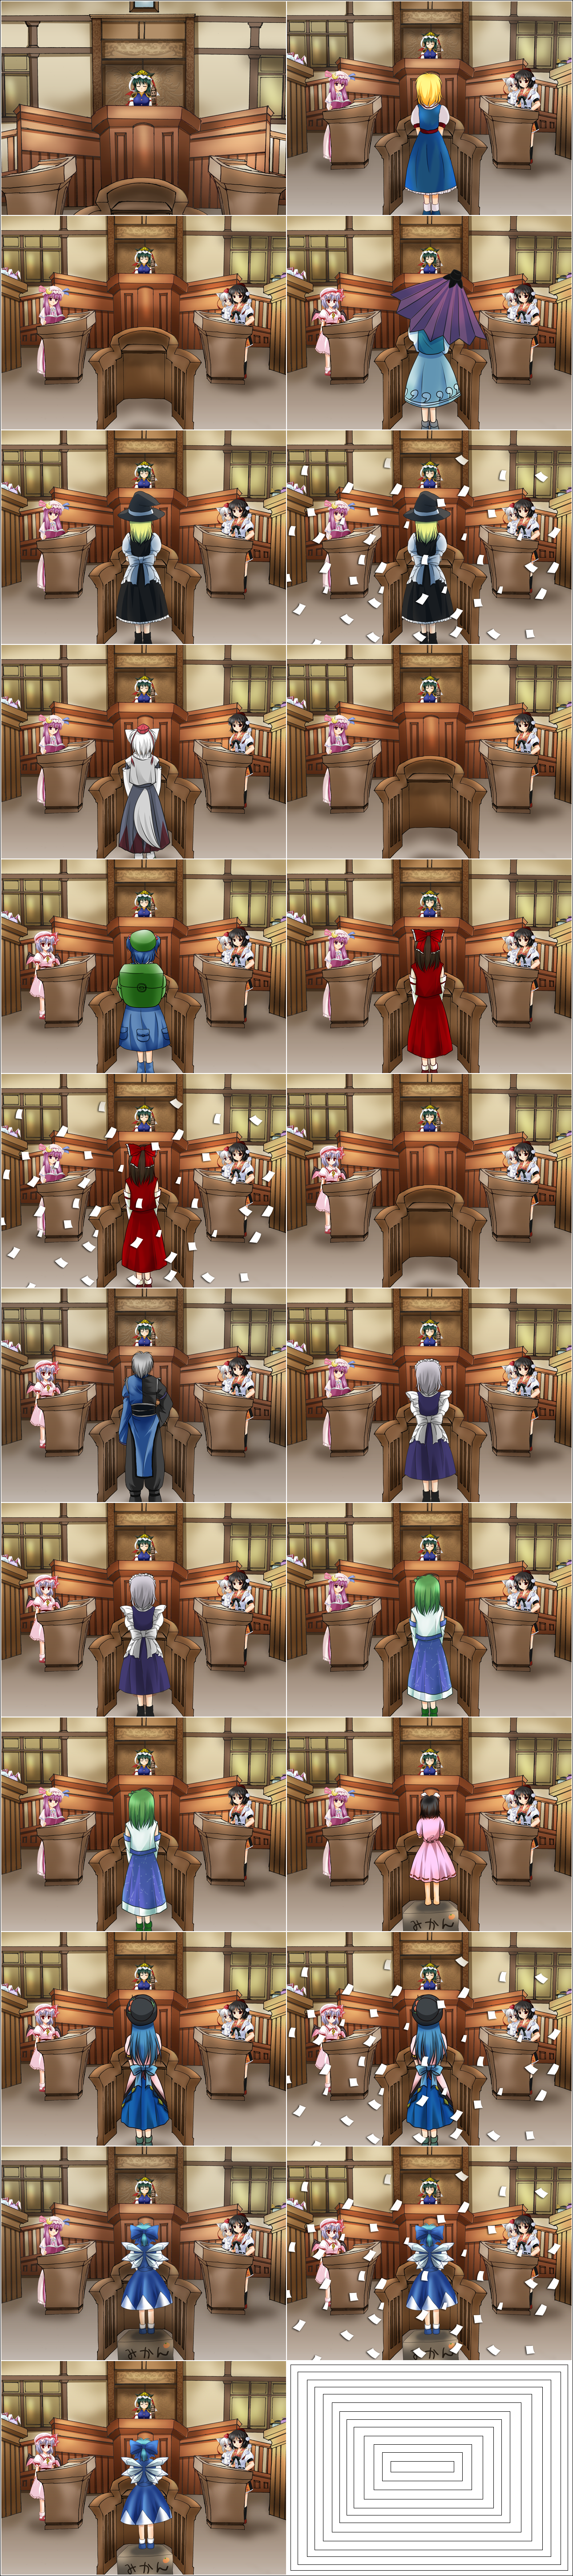 Courtroom Overview